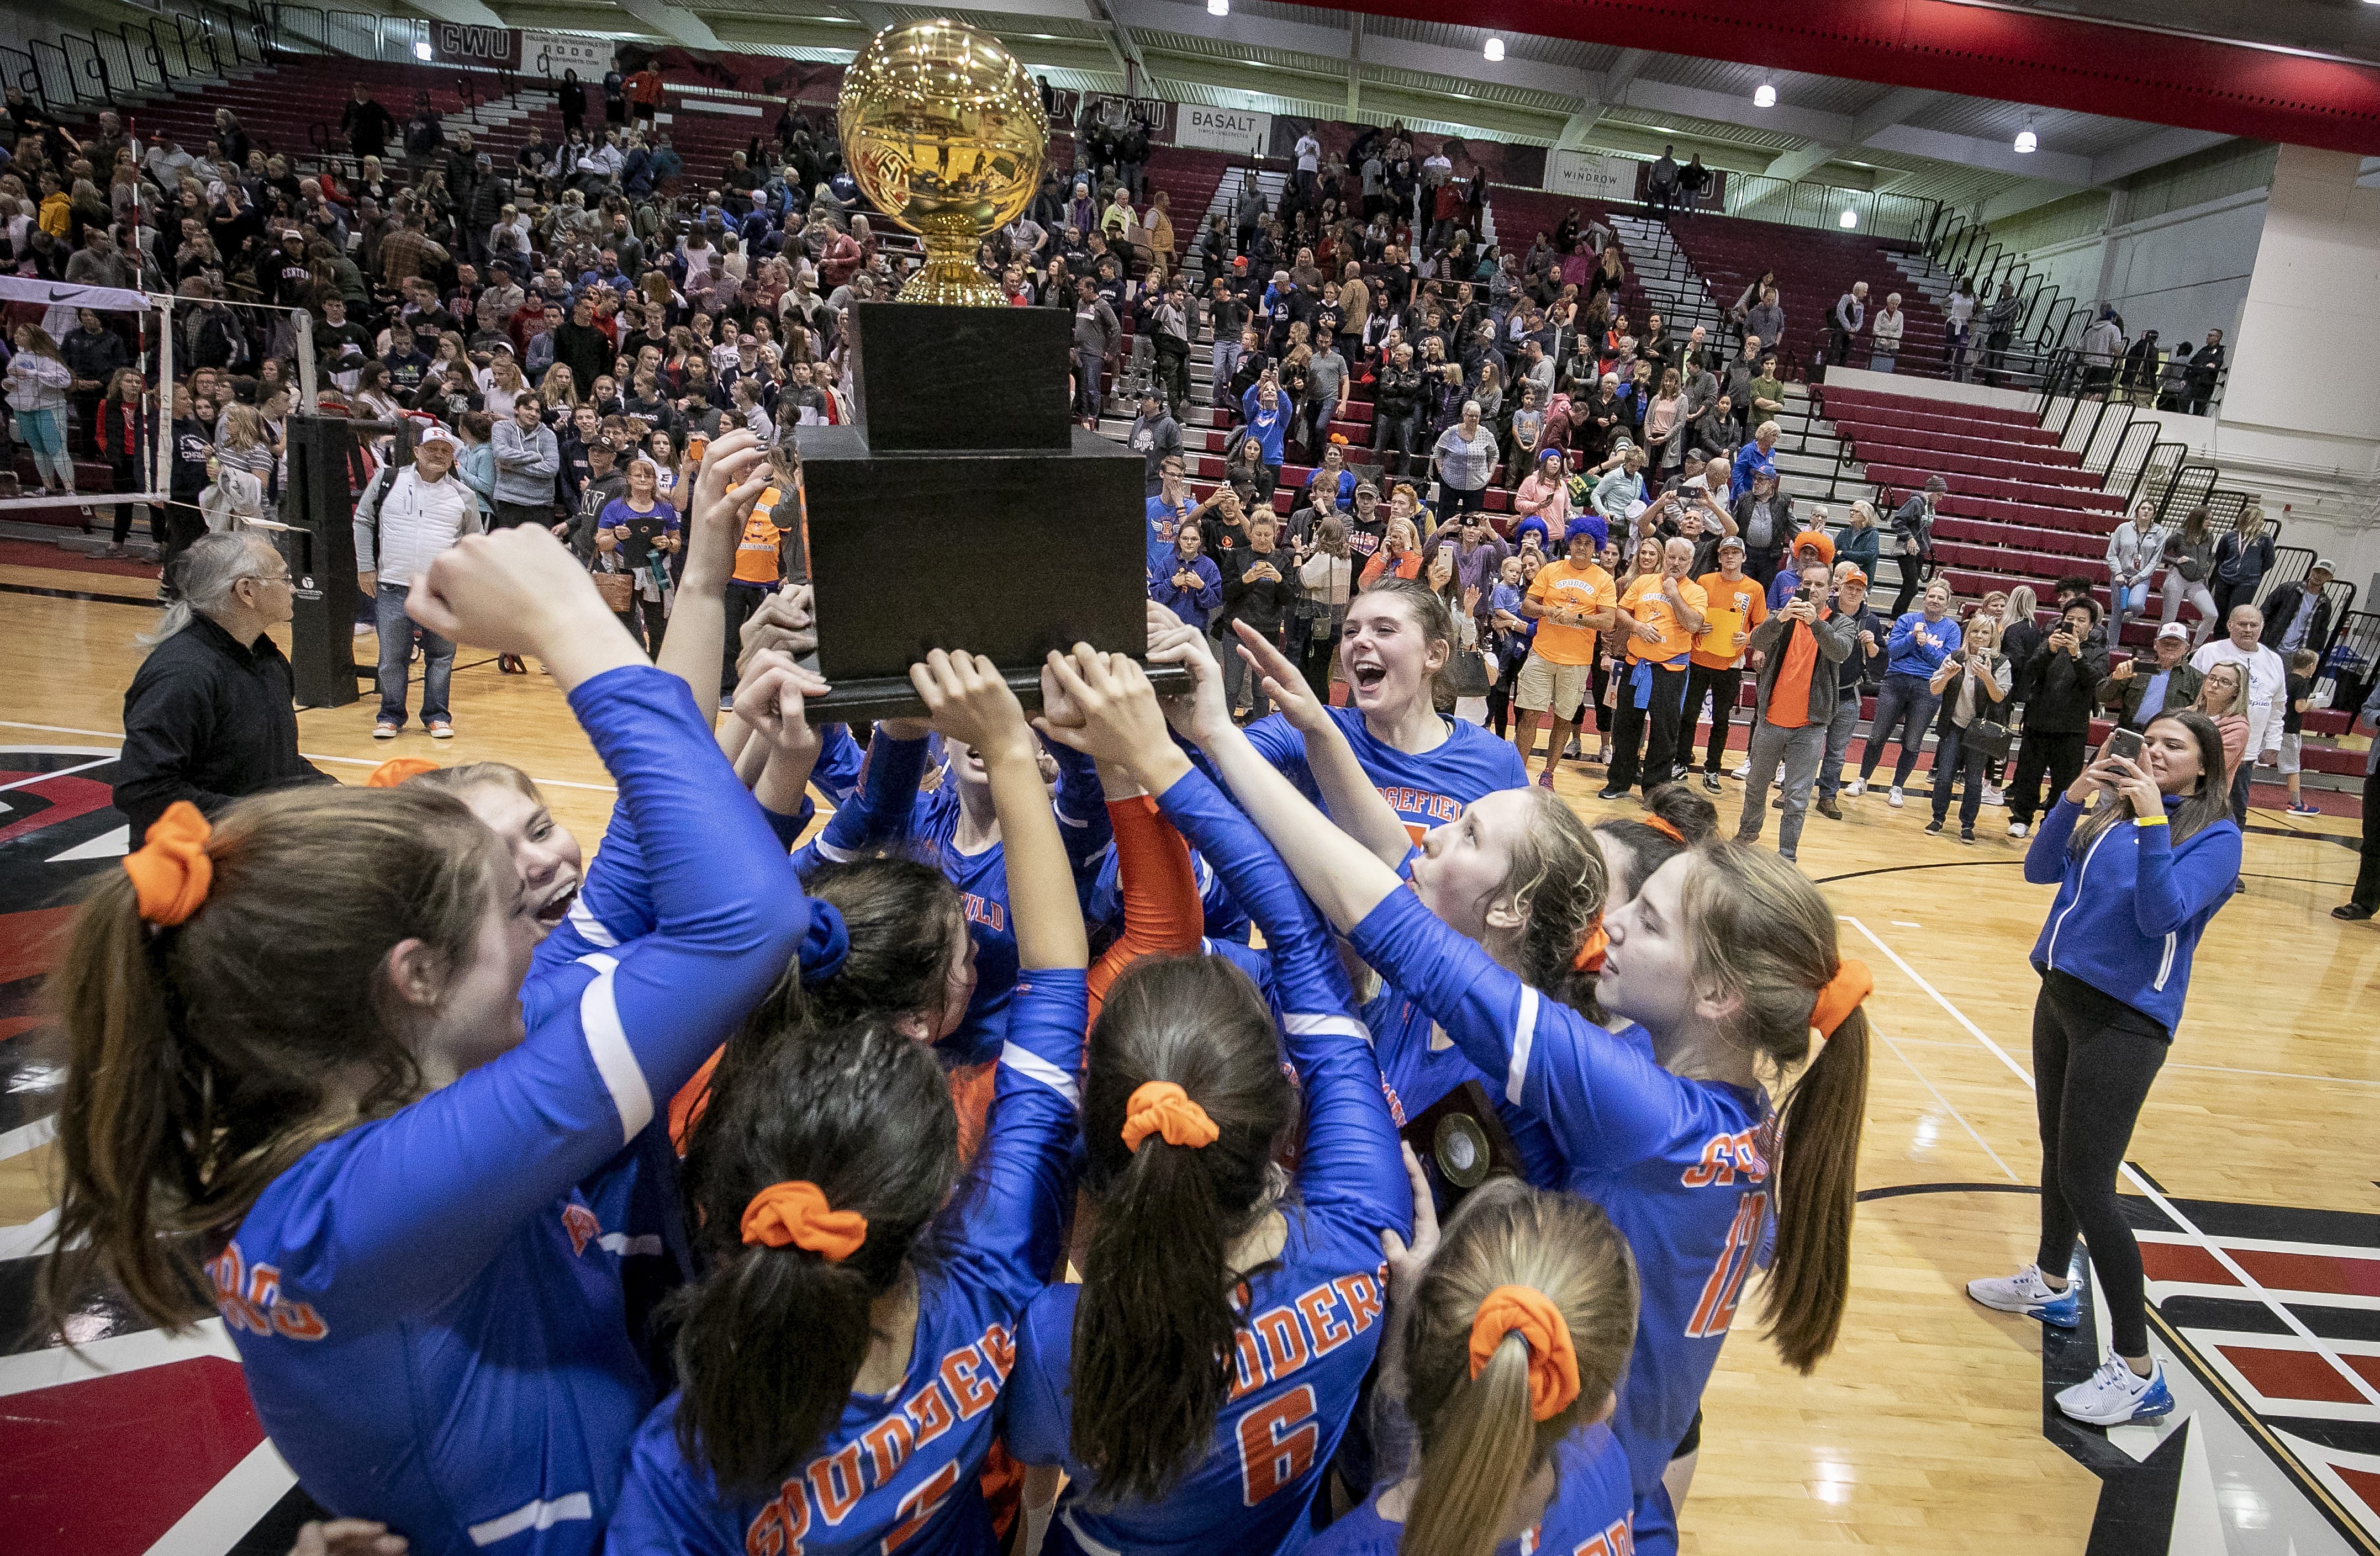 The Ridgefield High School volleyball team celebrates their WIAA 2A girls championship win with their fans after the Spudders defeats the Ellensburg Bulldogs 3-1 on Saturday, Nov. 16, 2019, at the Nicholson Pavilion in Ellensburg, Wash.